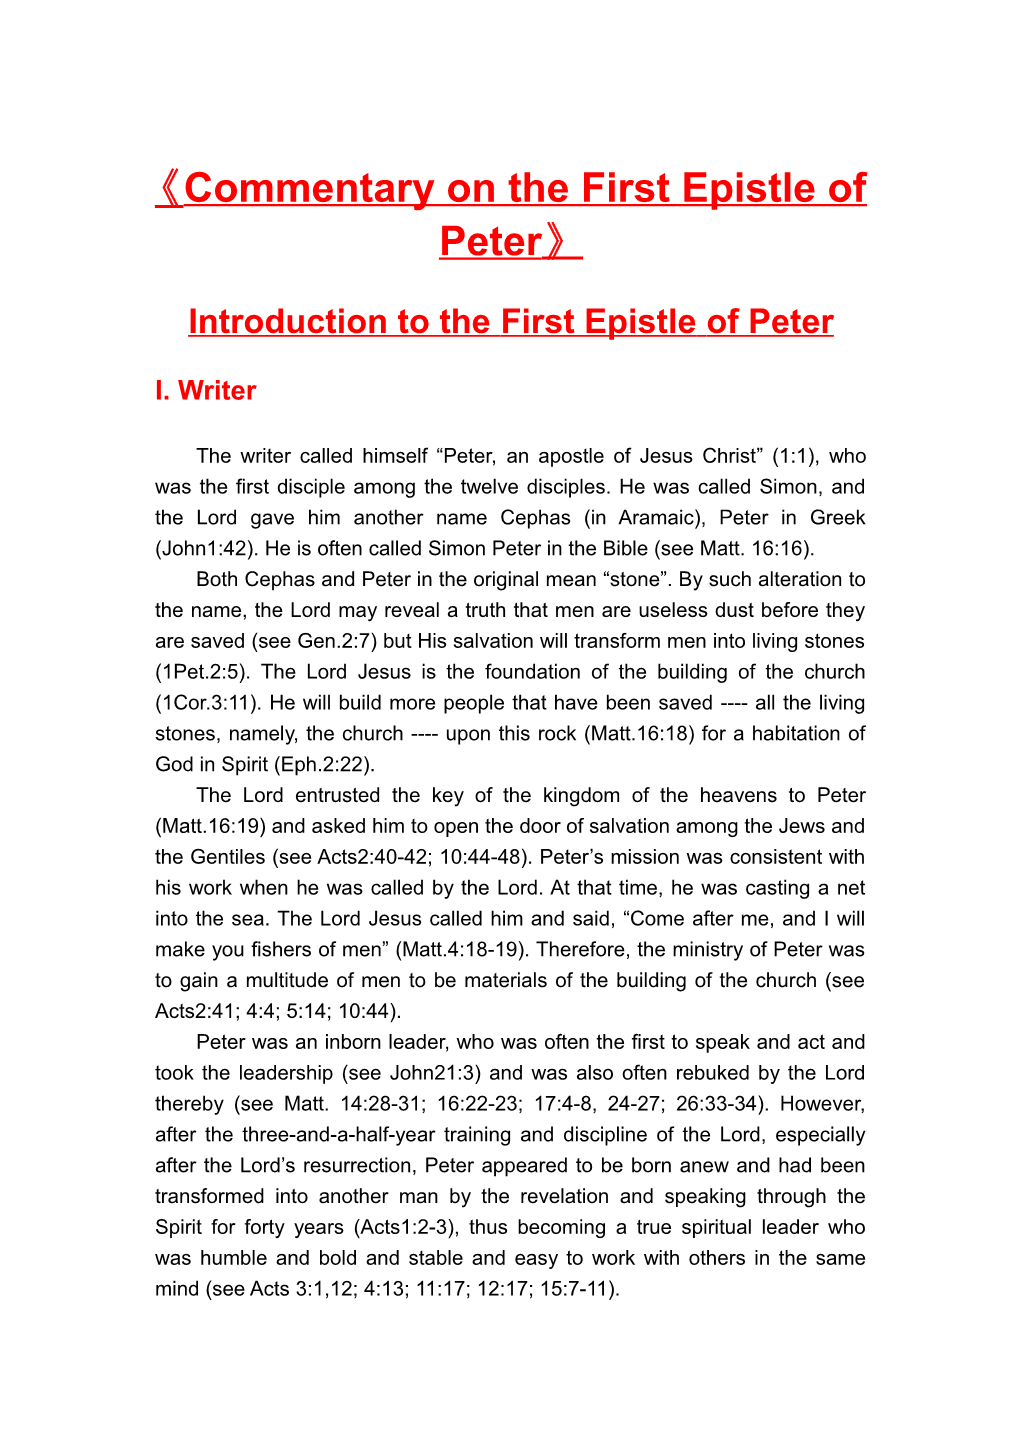 Commentary on the First Epistle of Peter